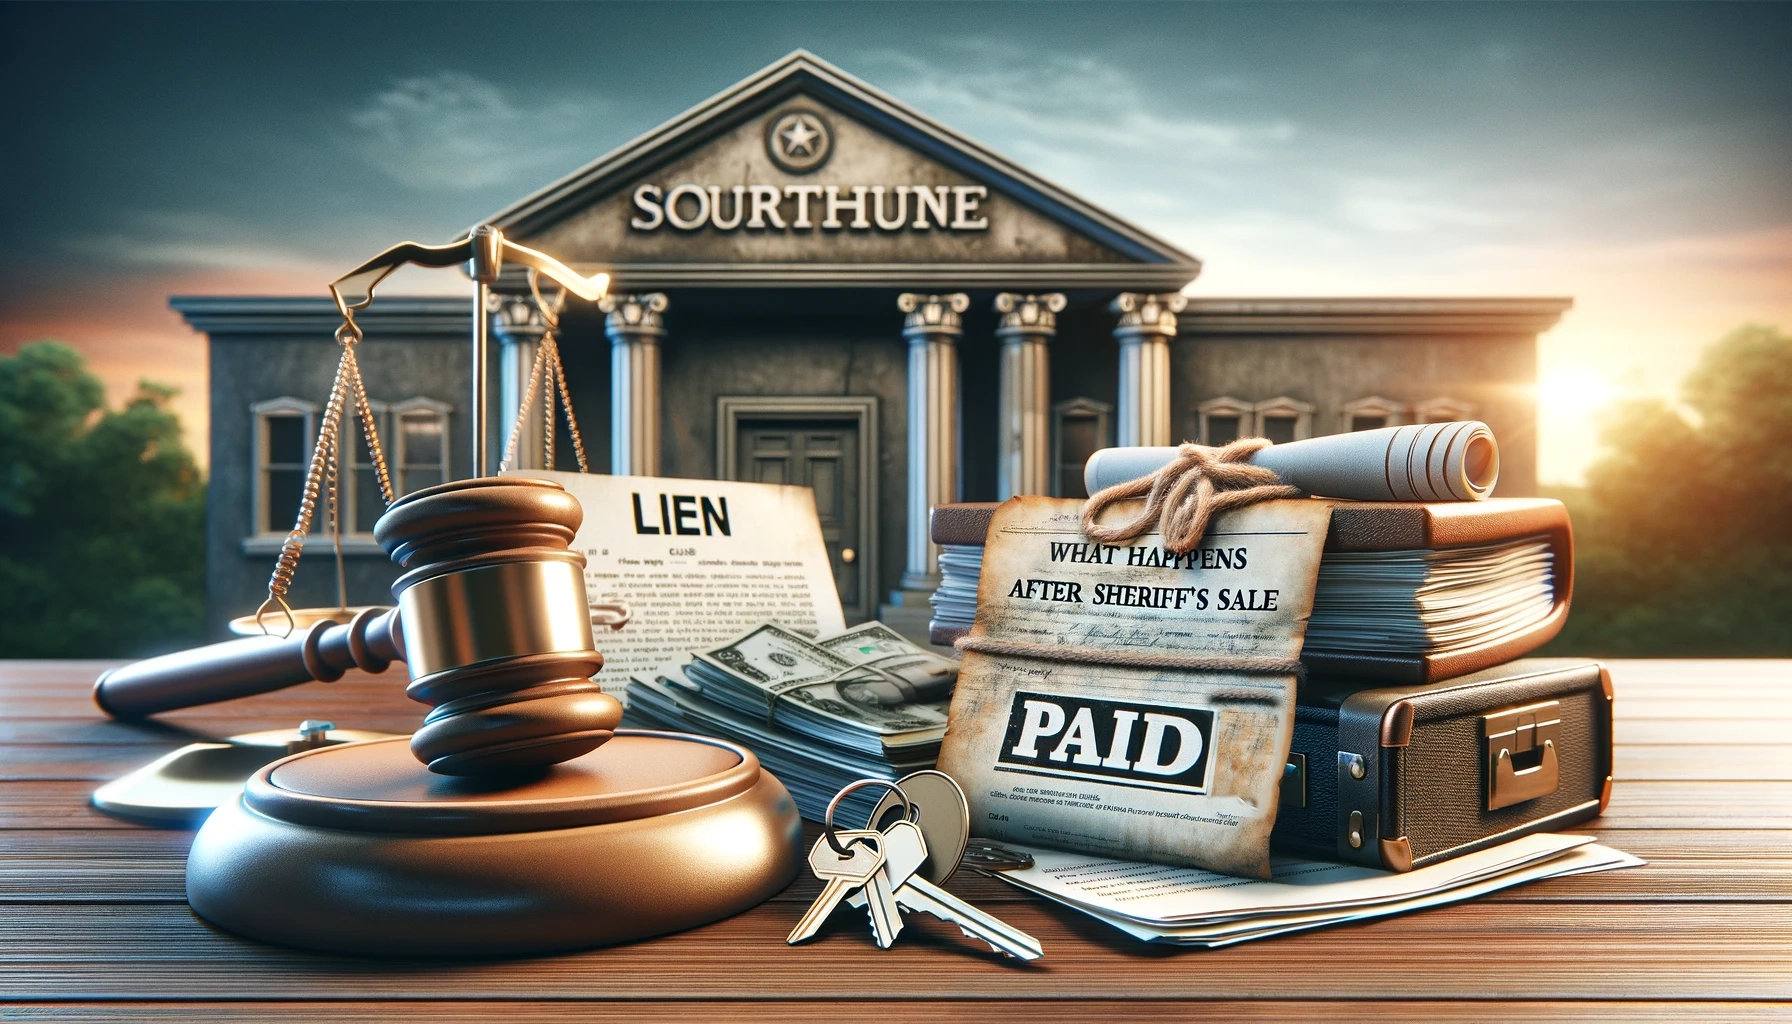 Courthouse backdrop with a sheriff's sale conclusion, featuring a gavel on legal documents, keys, and a 'Paid' stamp on a lien notice, symbolizing lien resolution post-sale.